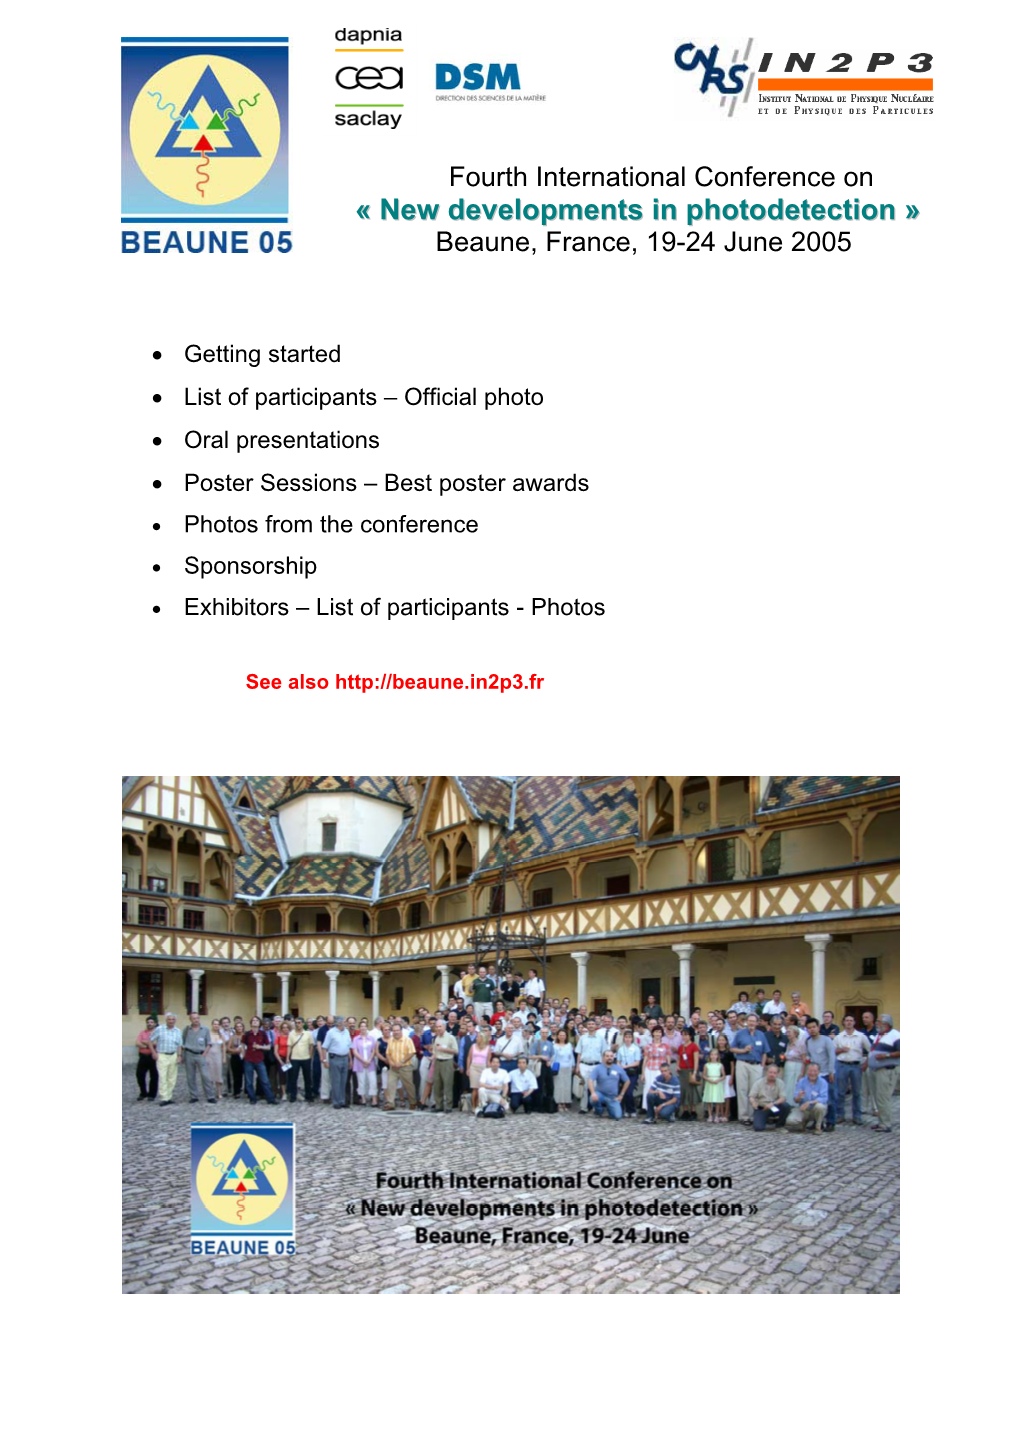 Fourth International Conference on « New Developments in Photodetection » Beaune, France, 19-24 June 2005